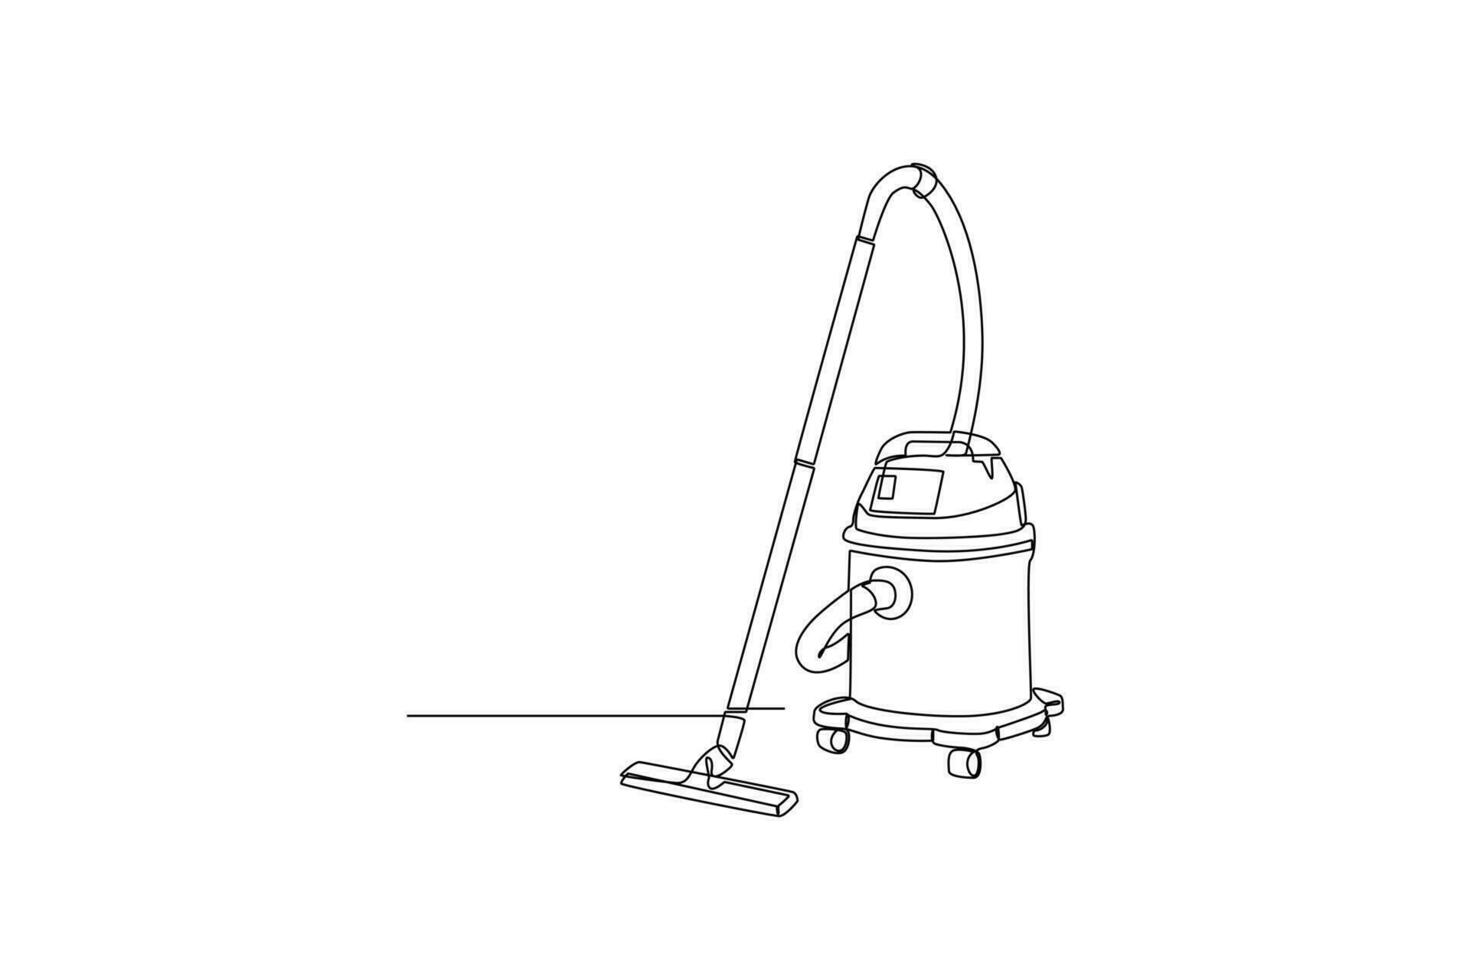 Continuous one line drawing vacuum cleaner. Home appliances concept. Single line draw design vector graphic illustration.